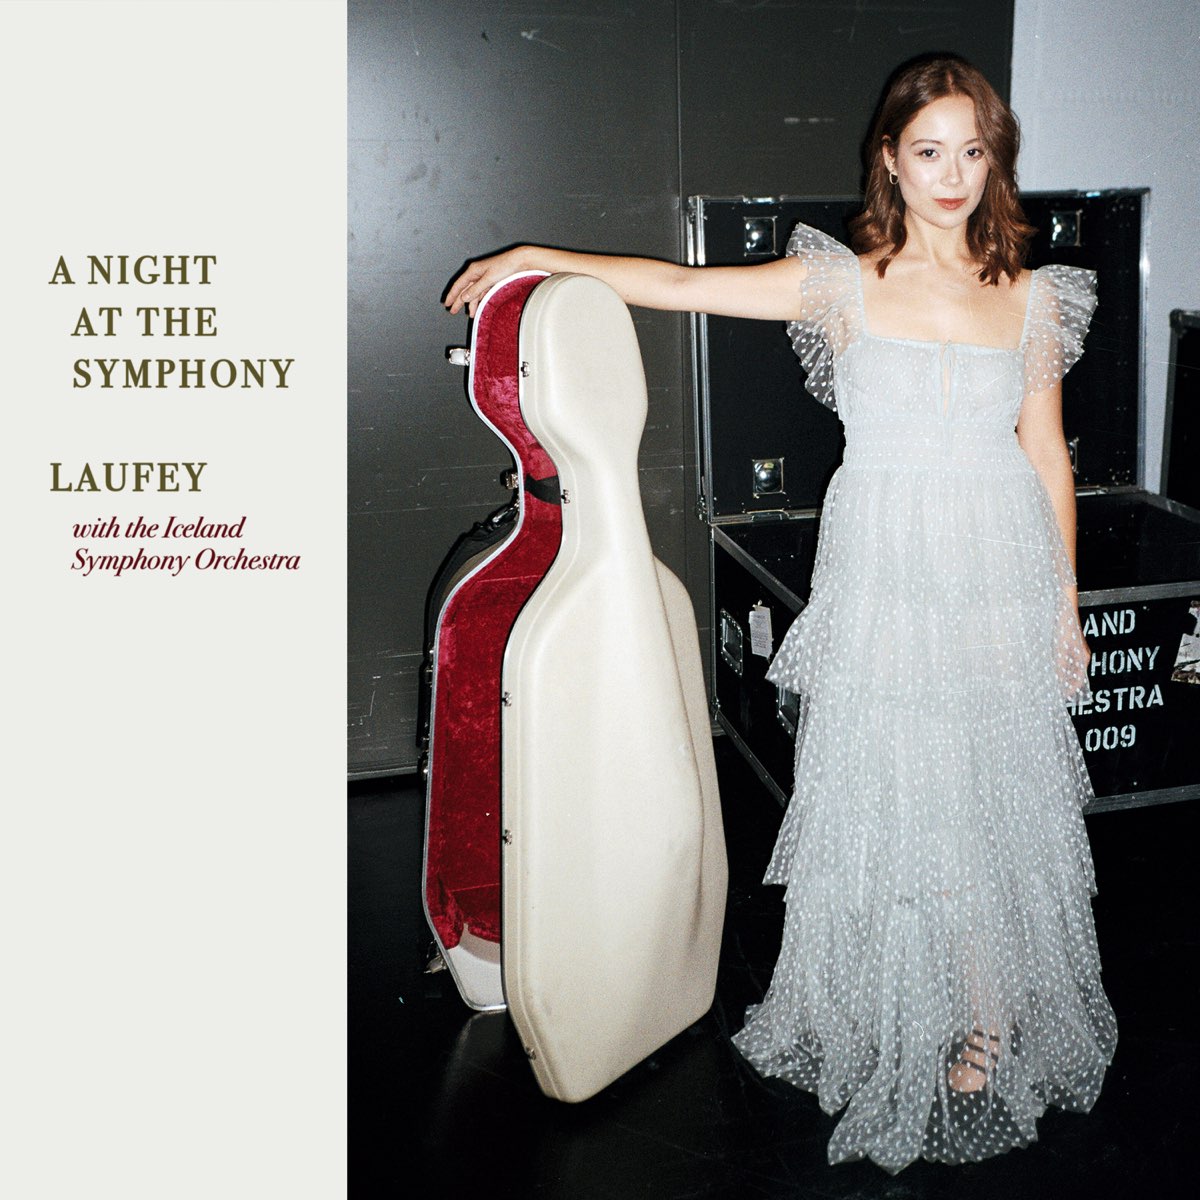 #NowPlaying_BVGH 
『A Night At The Symphony』(2023)
Laufey & Iceland Symphony Orchestra
48.0kHz/24bit
#Jazz #Classical